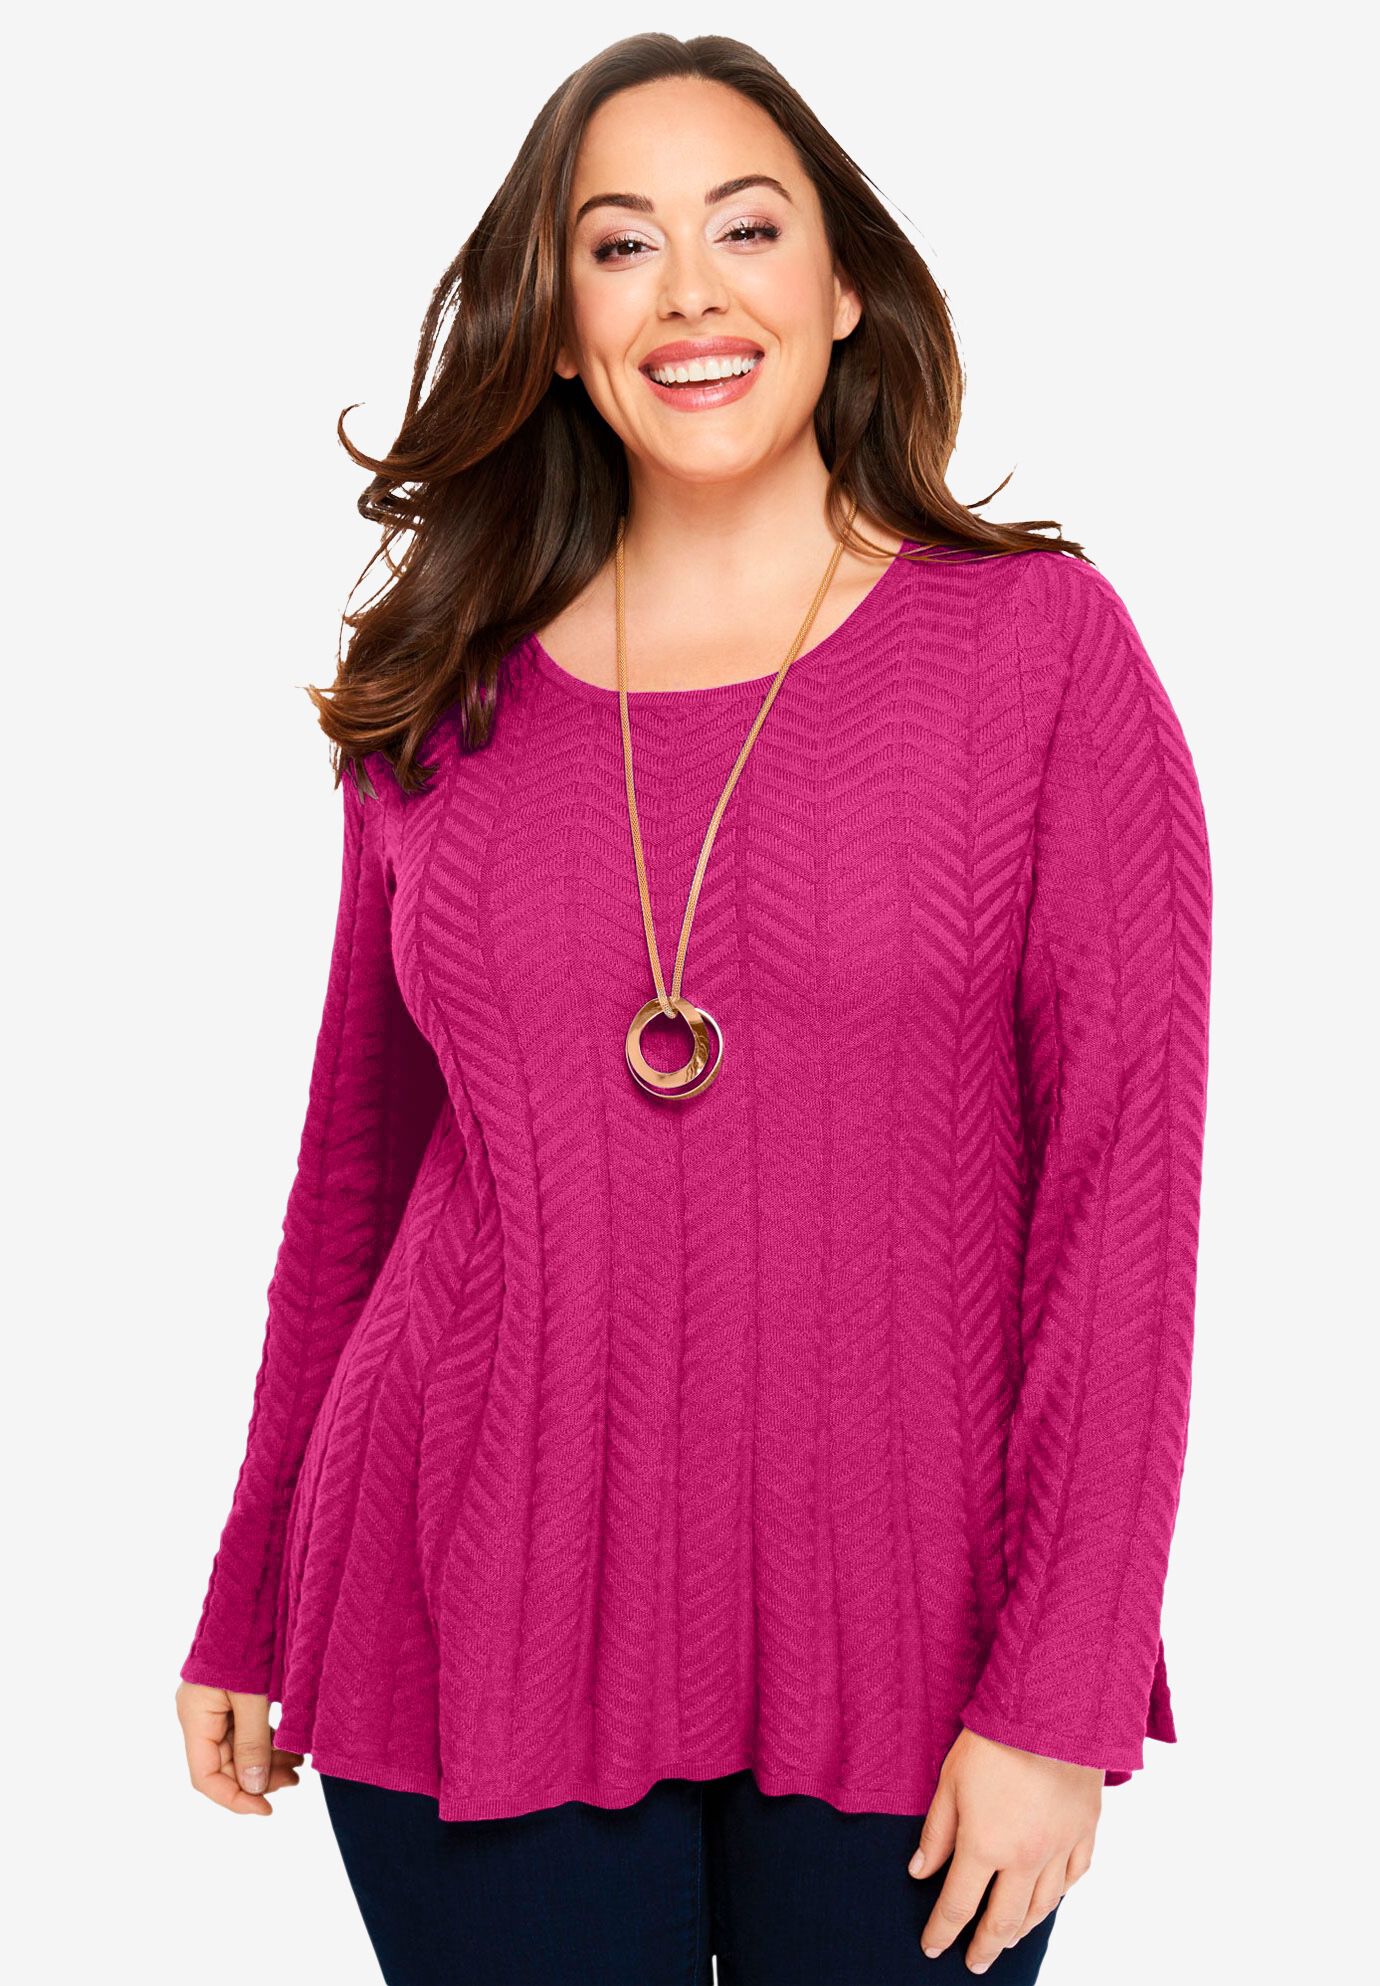 Clearance Plus Size Tops, Sweaters 